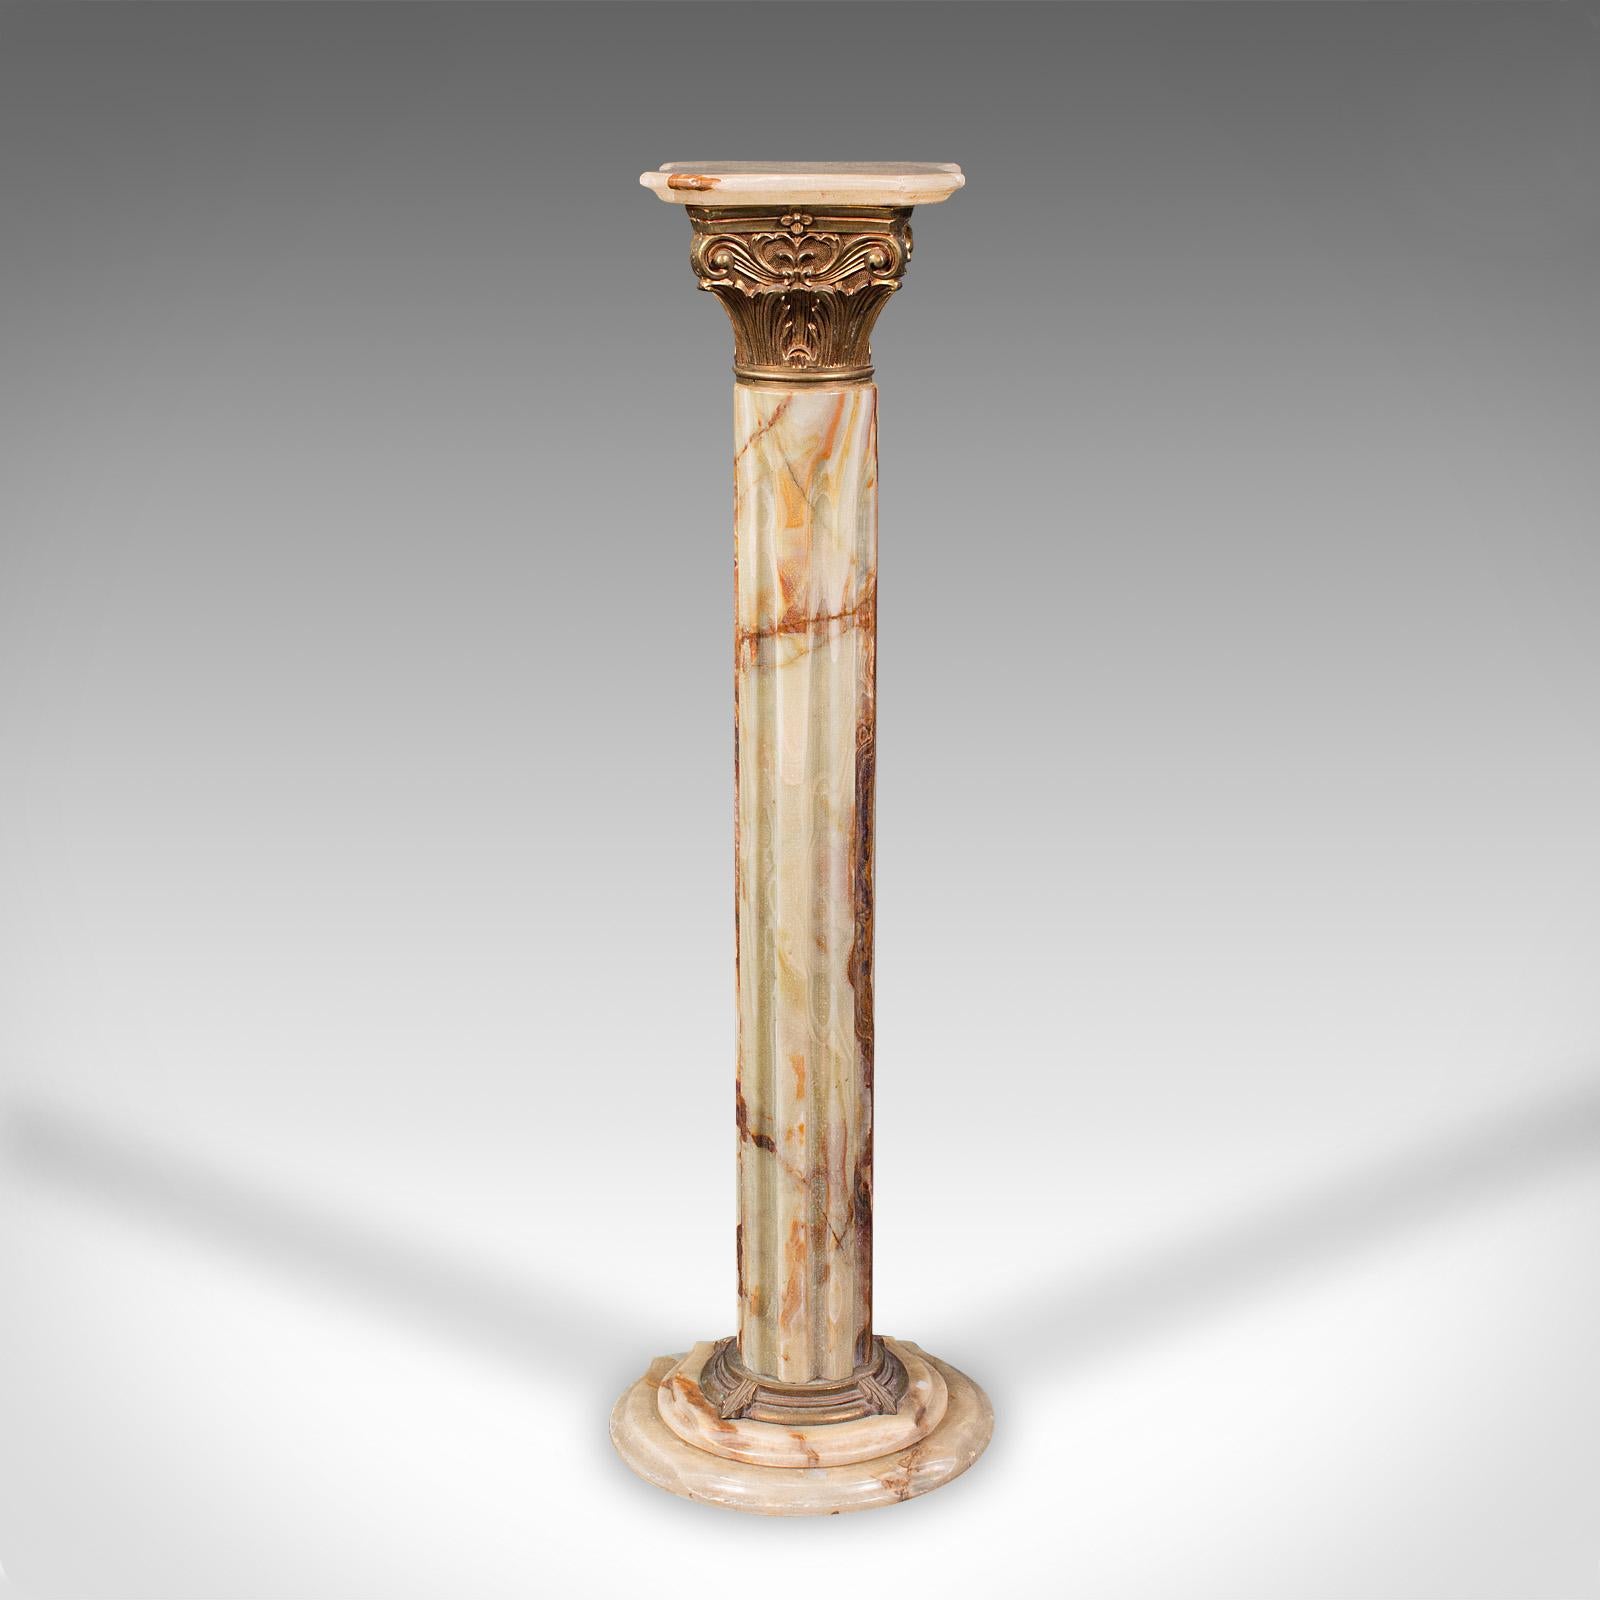 This is a vintage decorative jardiniere stand. An Italian, green onyx planter pedestal, dating to the mid 20th century, circa 1950.

Striking stand with attractive colour and form
Displays a desirable aged patina and in good order
Green onyx